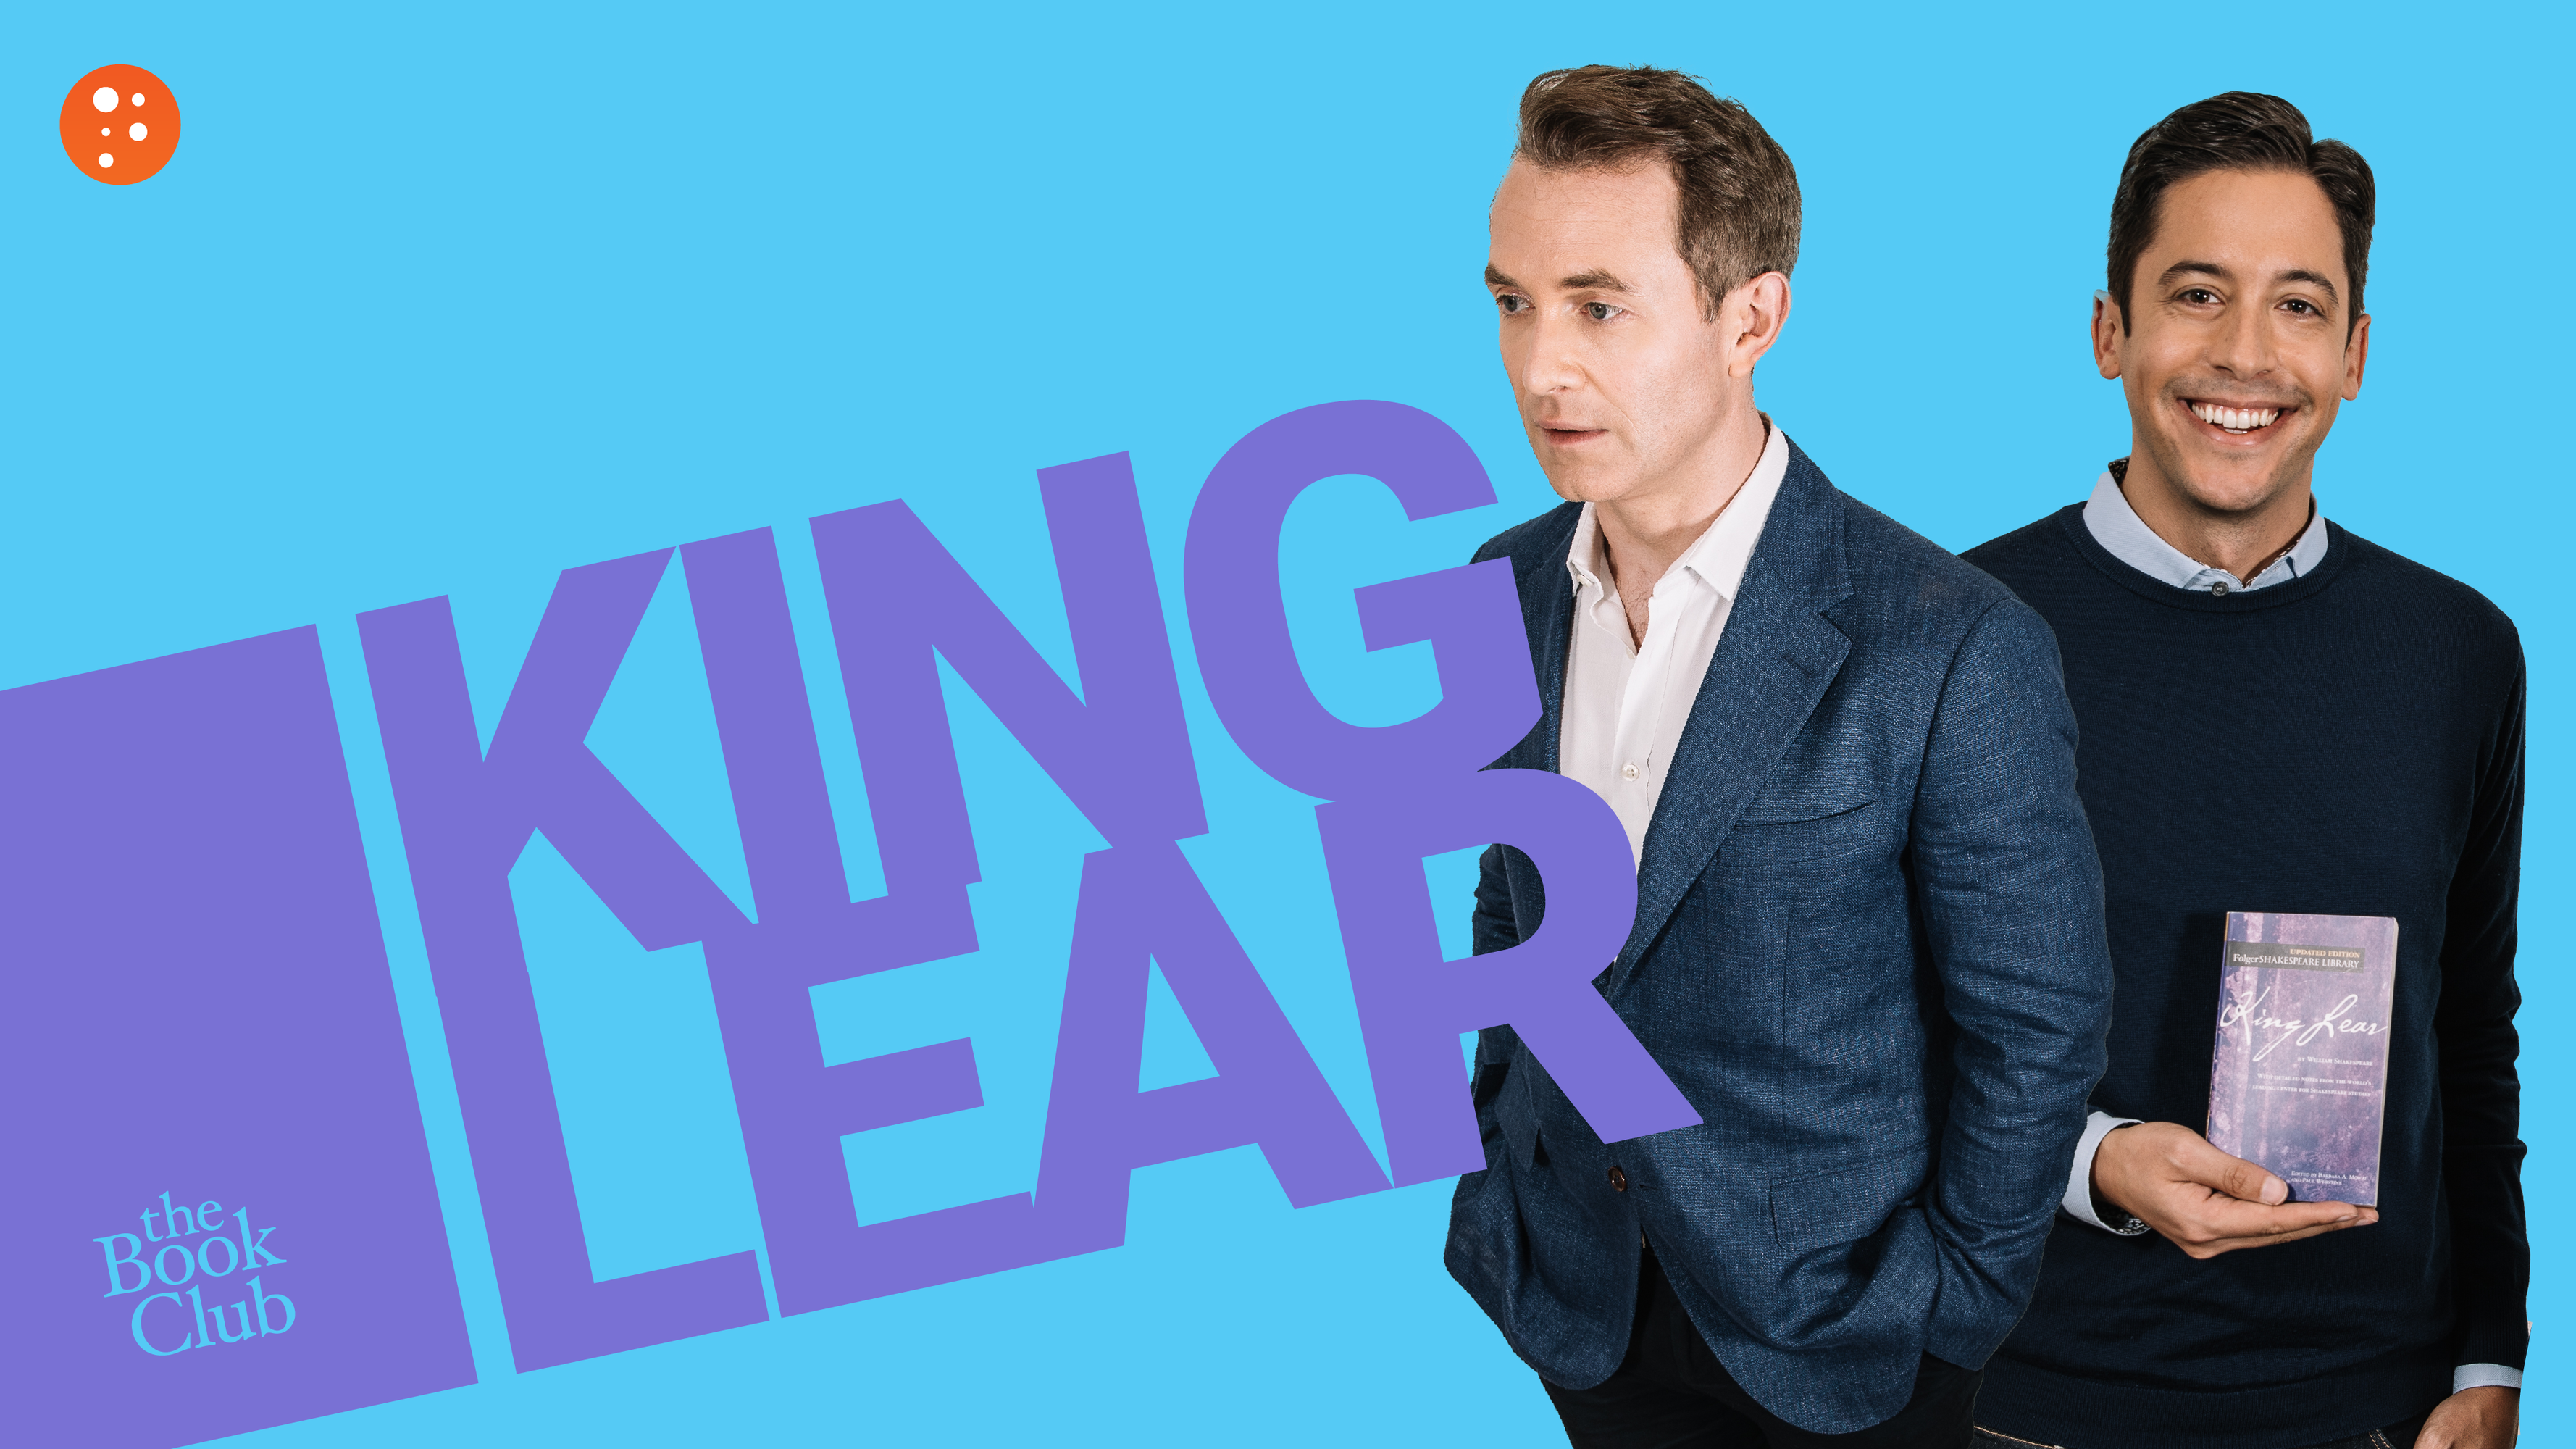 Douglas Murray: King Lear by William Shakespeare